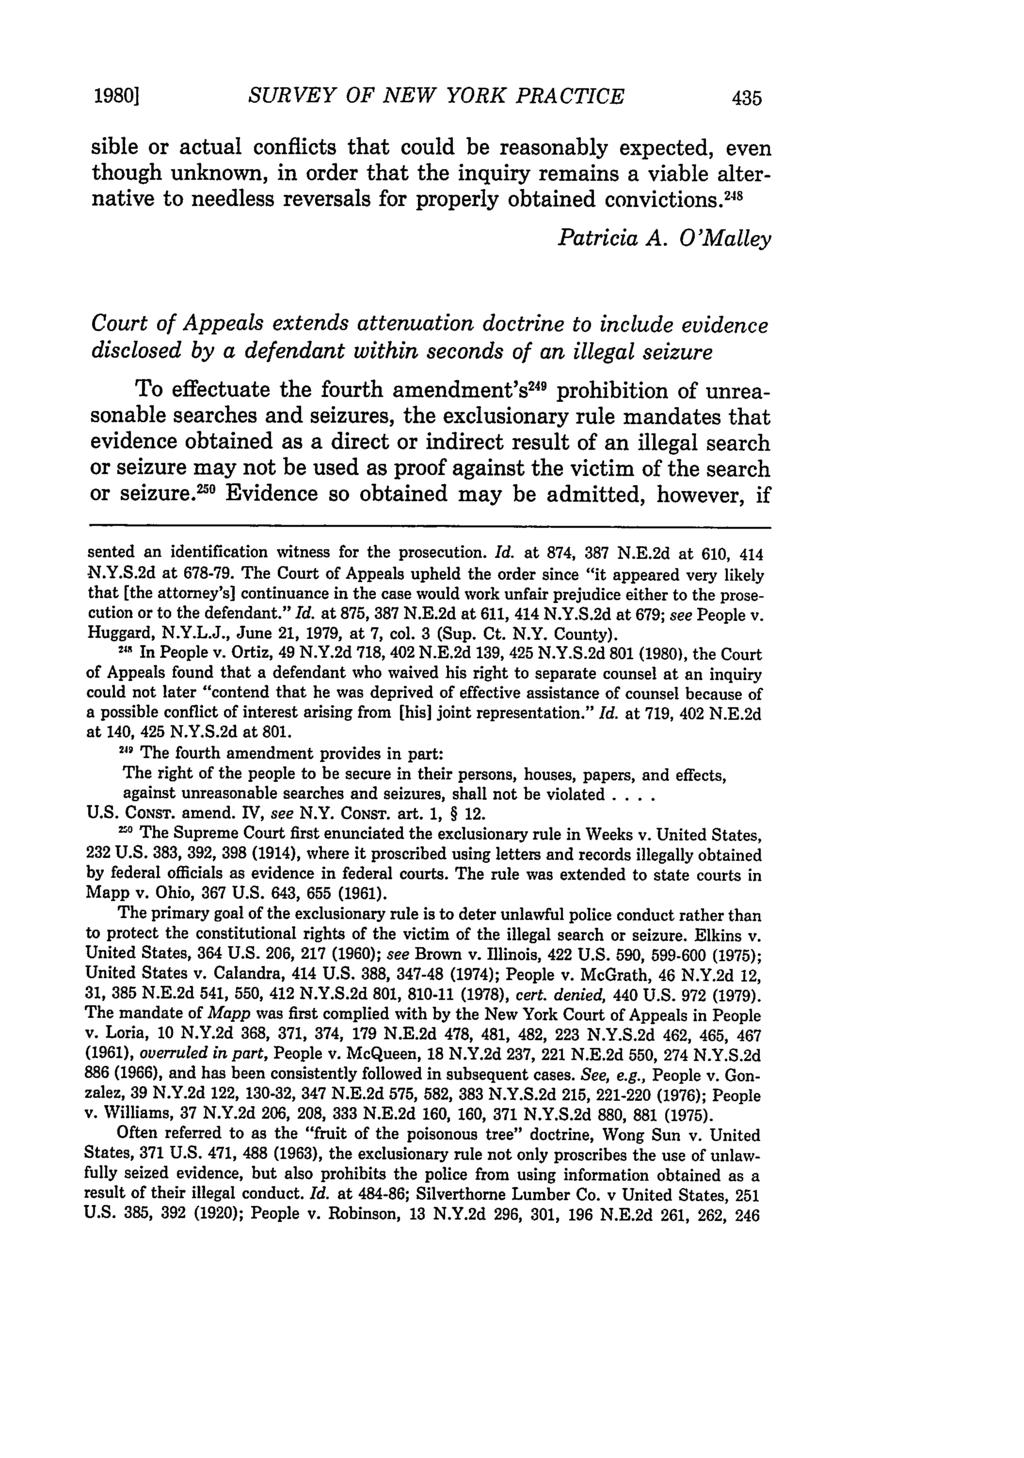 19801 SURVEY OF NEW YORK PRACTICE sible or actual conflicts that could be reasonably expected, even though unknown, in order that the inquiry remains a viable alternative to needless reversals for